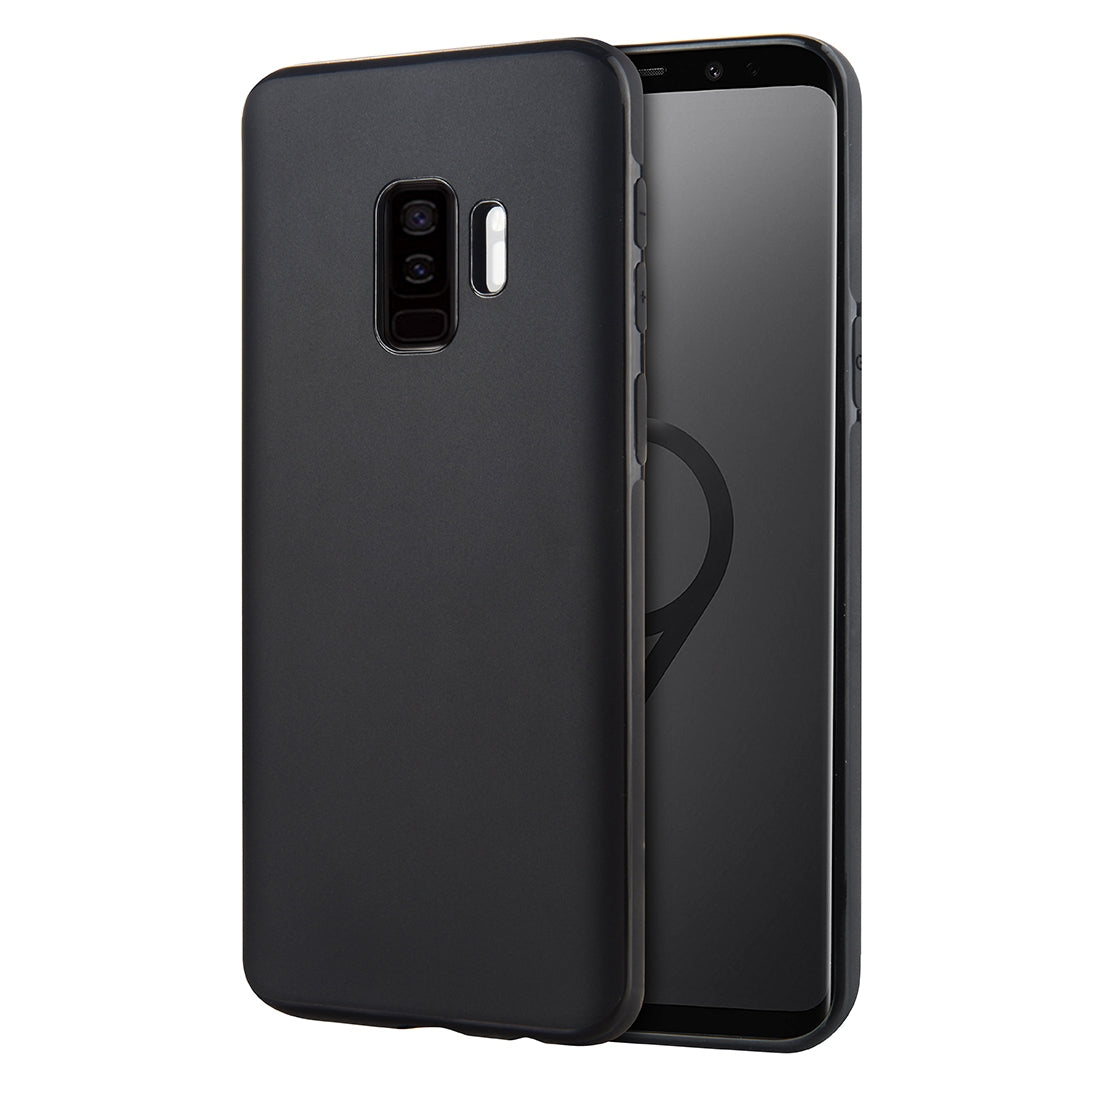 SULADA Car Series Magnetic Suction TPU Case for Galaxy S9+ (Black)